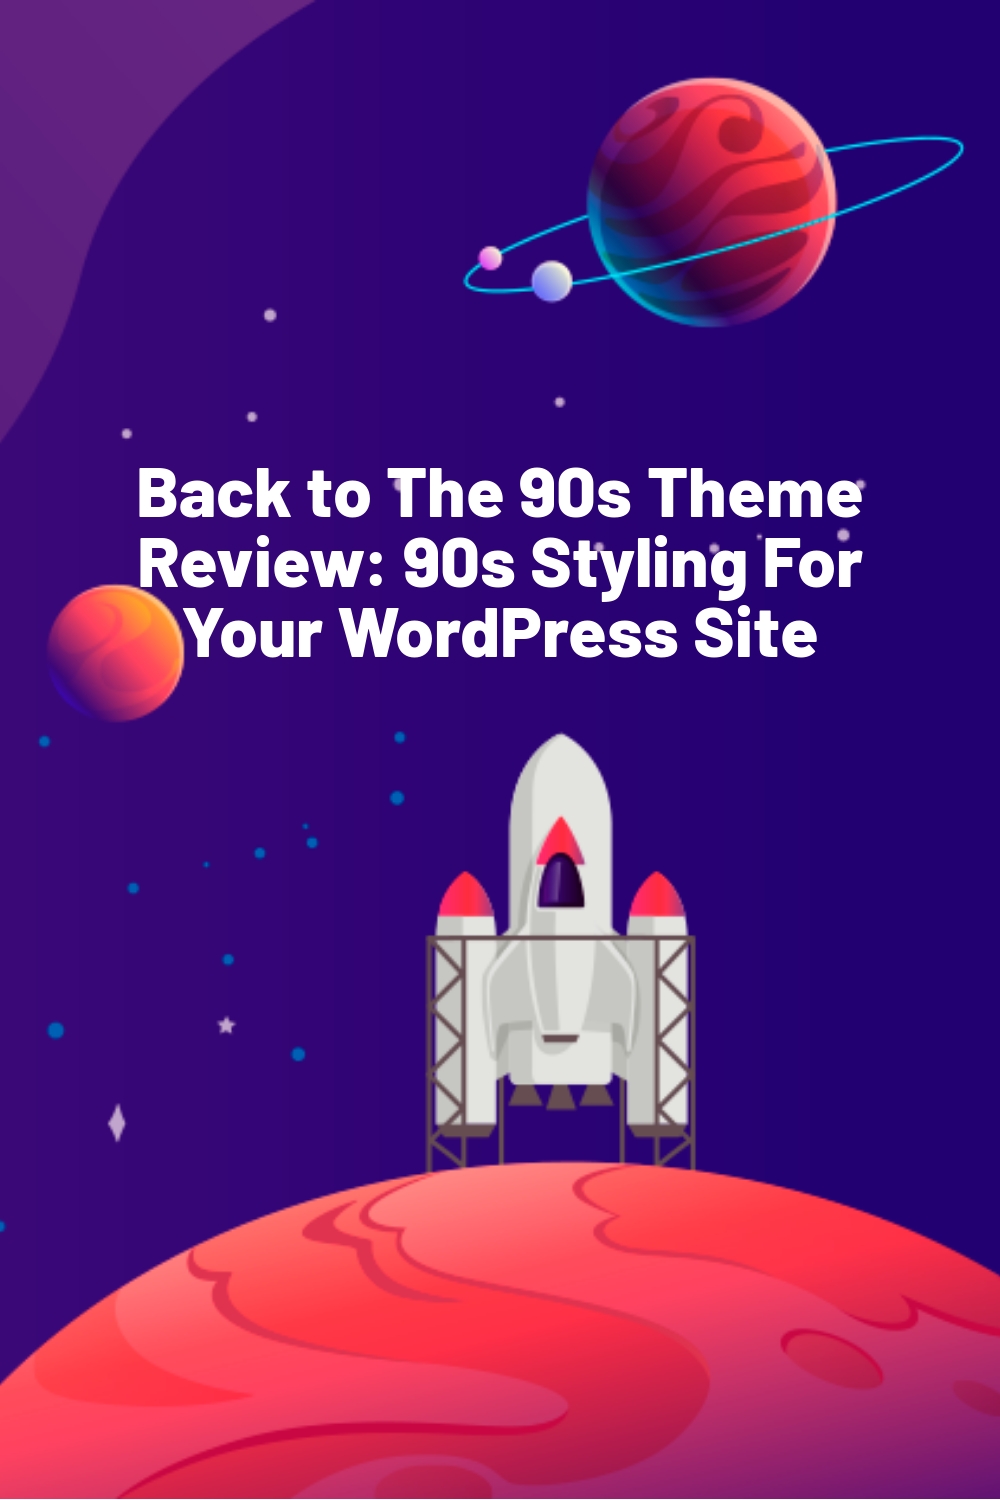 Back to The 90s Theme Review: 90s Styling For Your WordPress Site